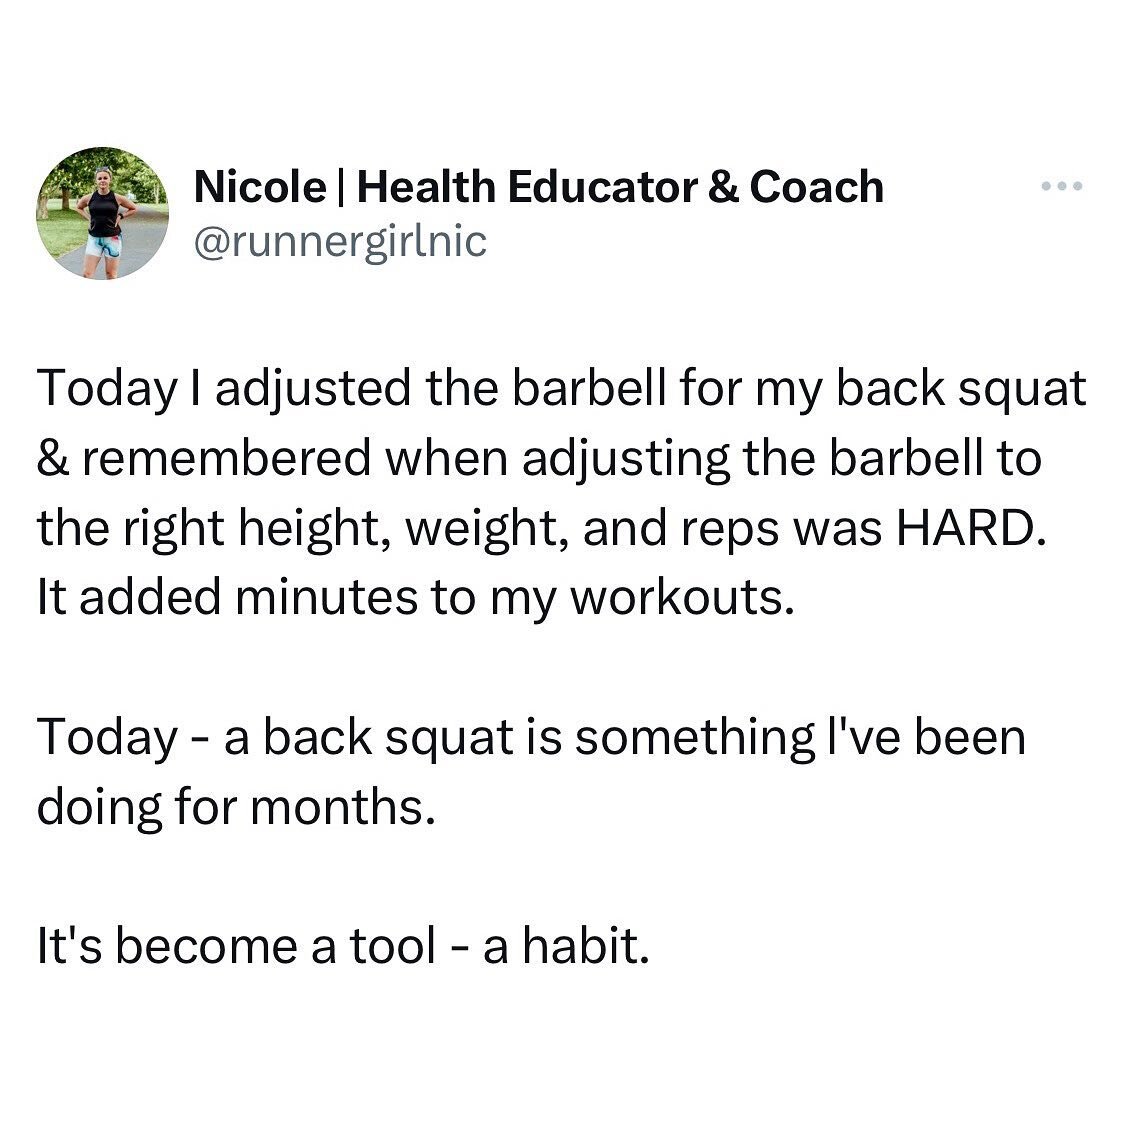 Make your hard ➡️ HABIT.

Most things that are new *will* be challenging and uncomfy. Those minutes spent figuring out how to use a dang barbell were enough to make me wanna throw in the towel and go back to my dumbbells. 

If we don&rsquo;t practice